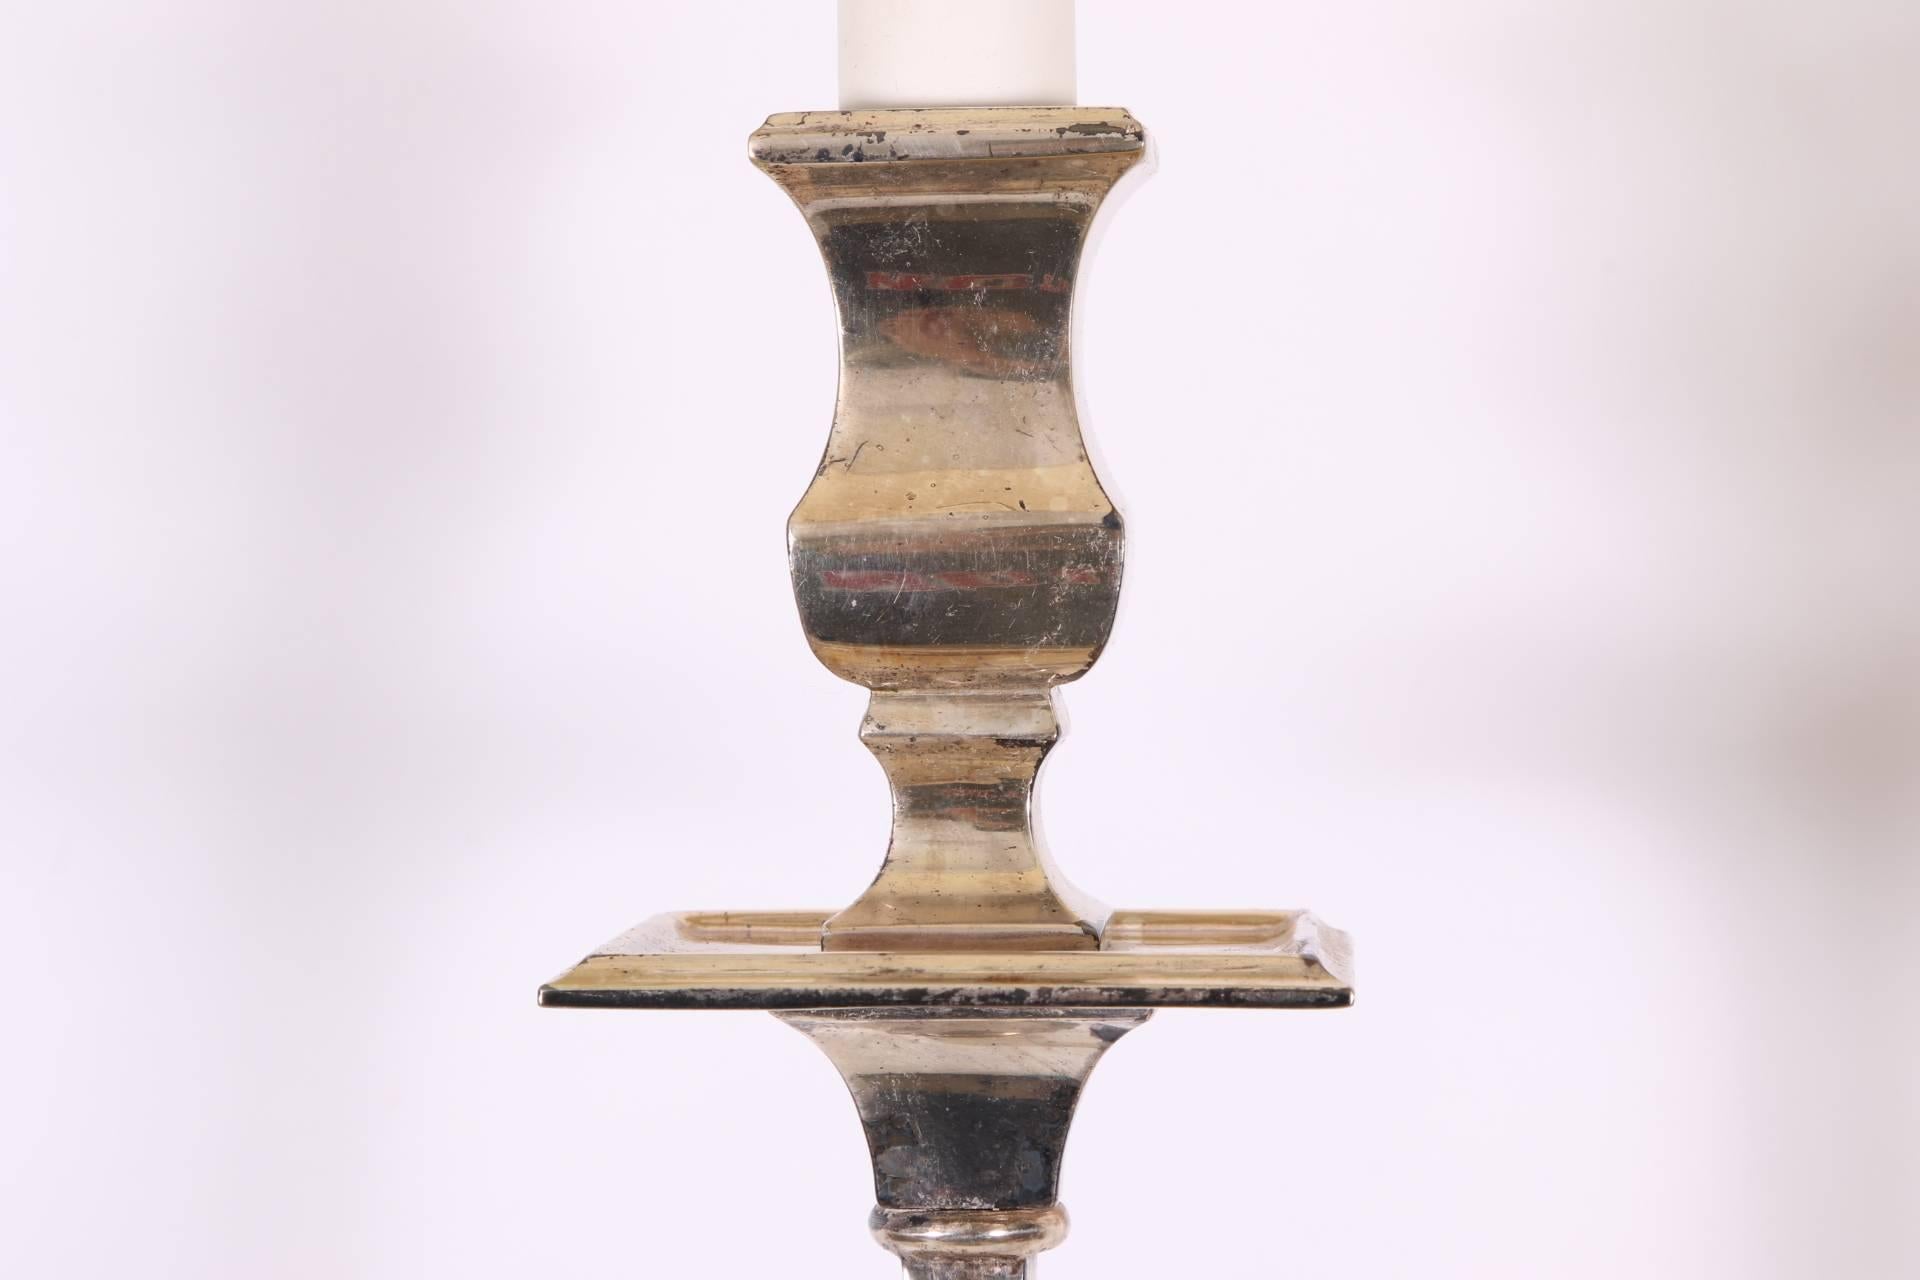 Each with double lights with urn form sockets and bobeches. The tall shaped supports are attached to terminals with star motifs in relief, with rectangular shades. Nice patina with wear to the silvered finish. Depth of fixture alone is 5 inches.